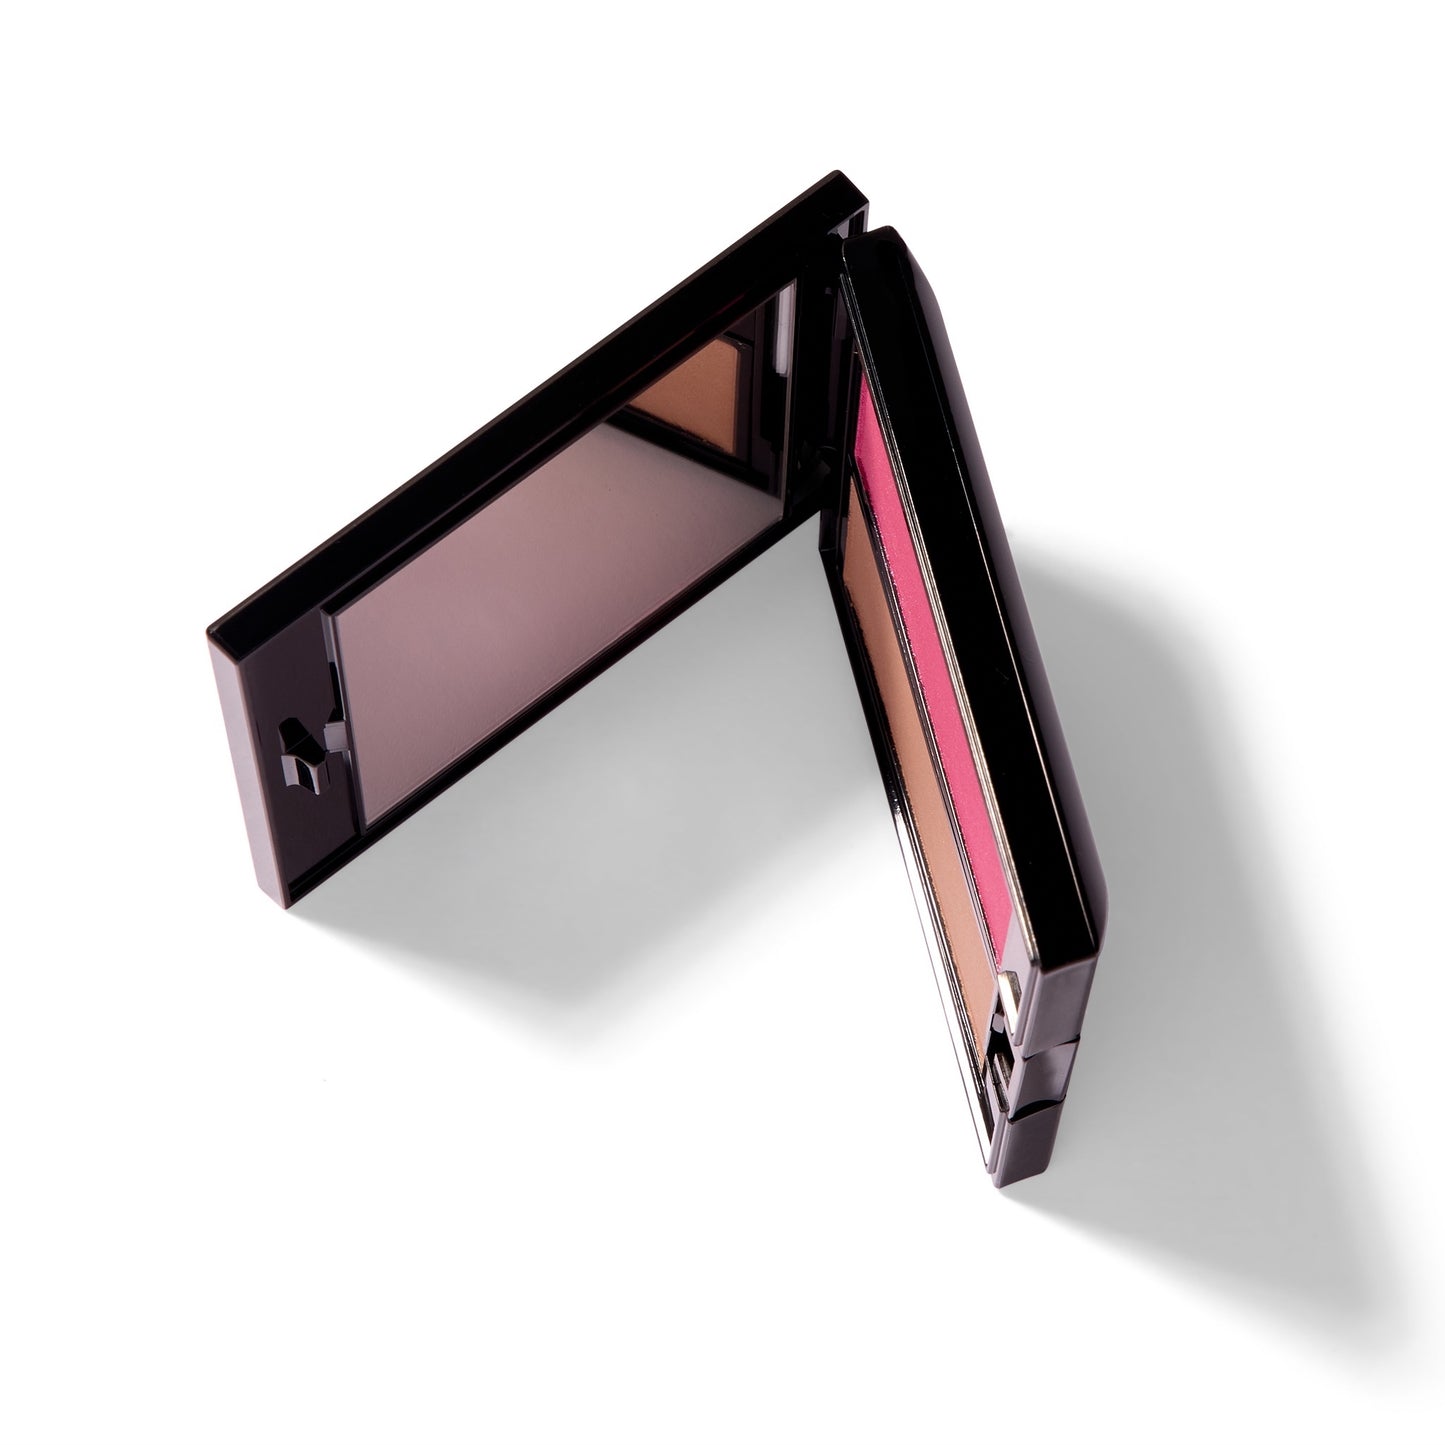 The black Compact Case I, slightly open and on it's side. You can see the mirror and a sliver of two blush colors inside the case.